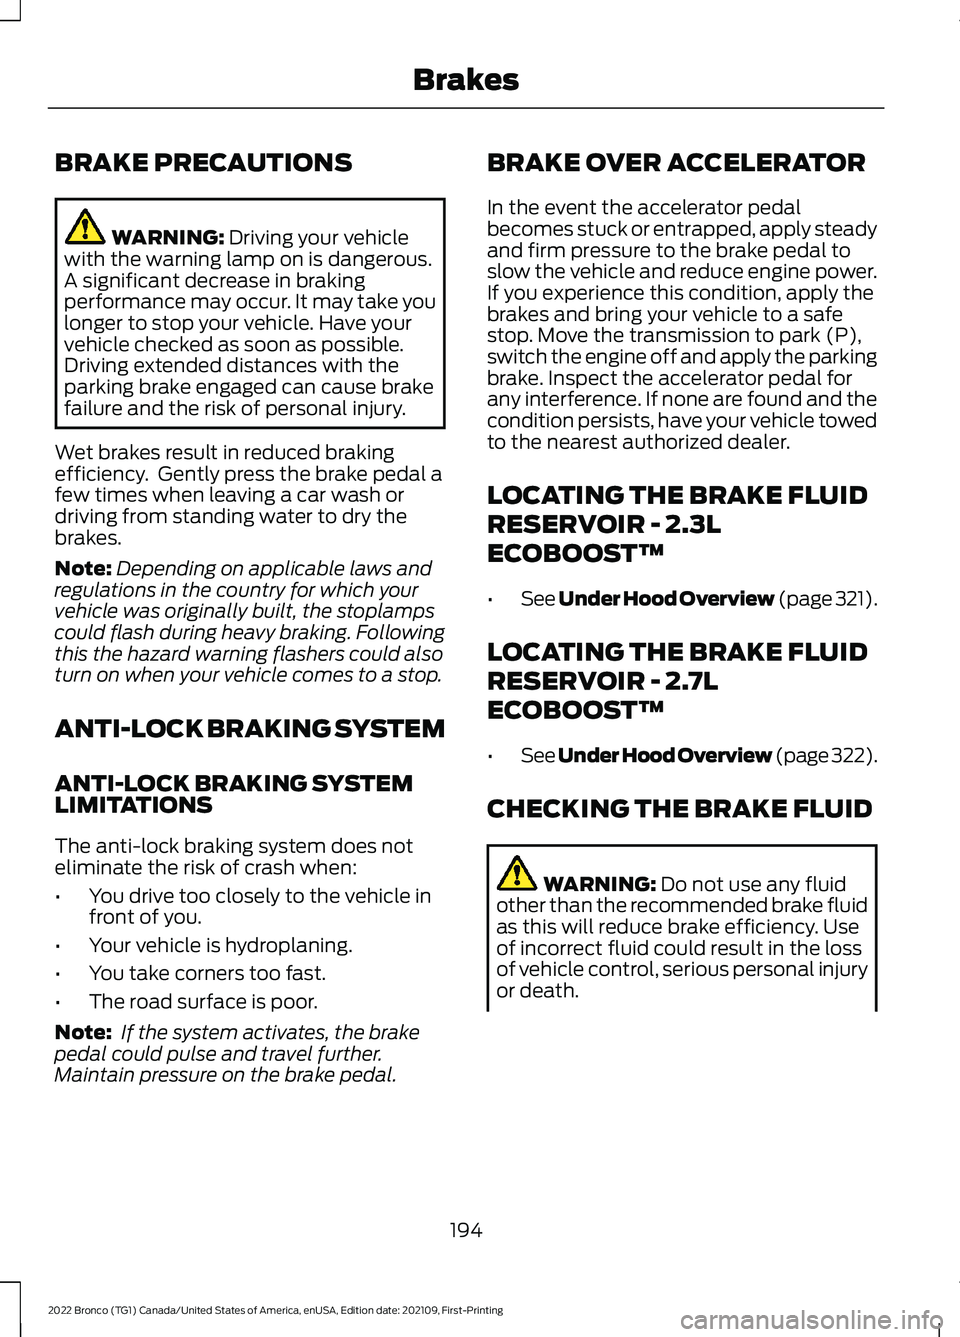 FORD BRONCO 2022  Owners Manual BRAKE PRECAUTIONS
WARNING: Driving your vehiclewith the warning lamp on is dangerous.A significant decrease in brakingperformance may occur. It may take youlonger to stop your vehicle. Have yourvehicl